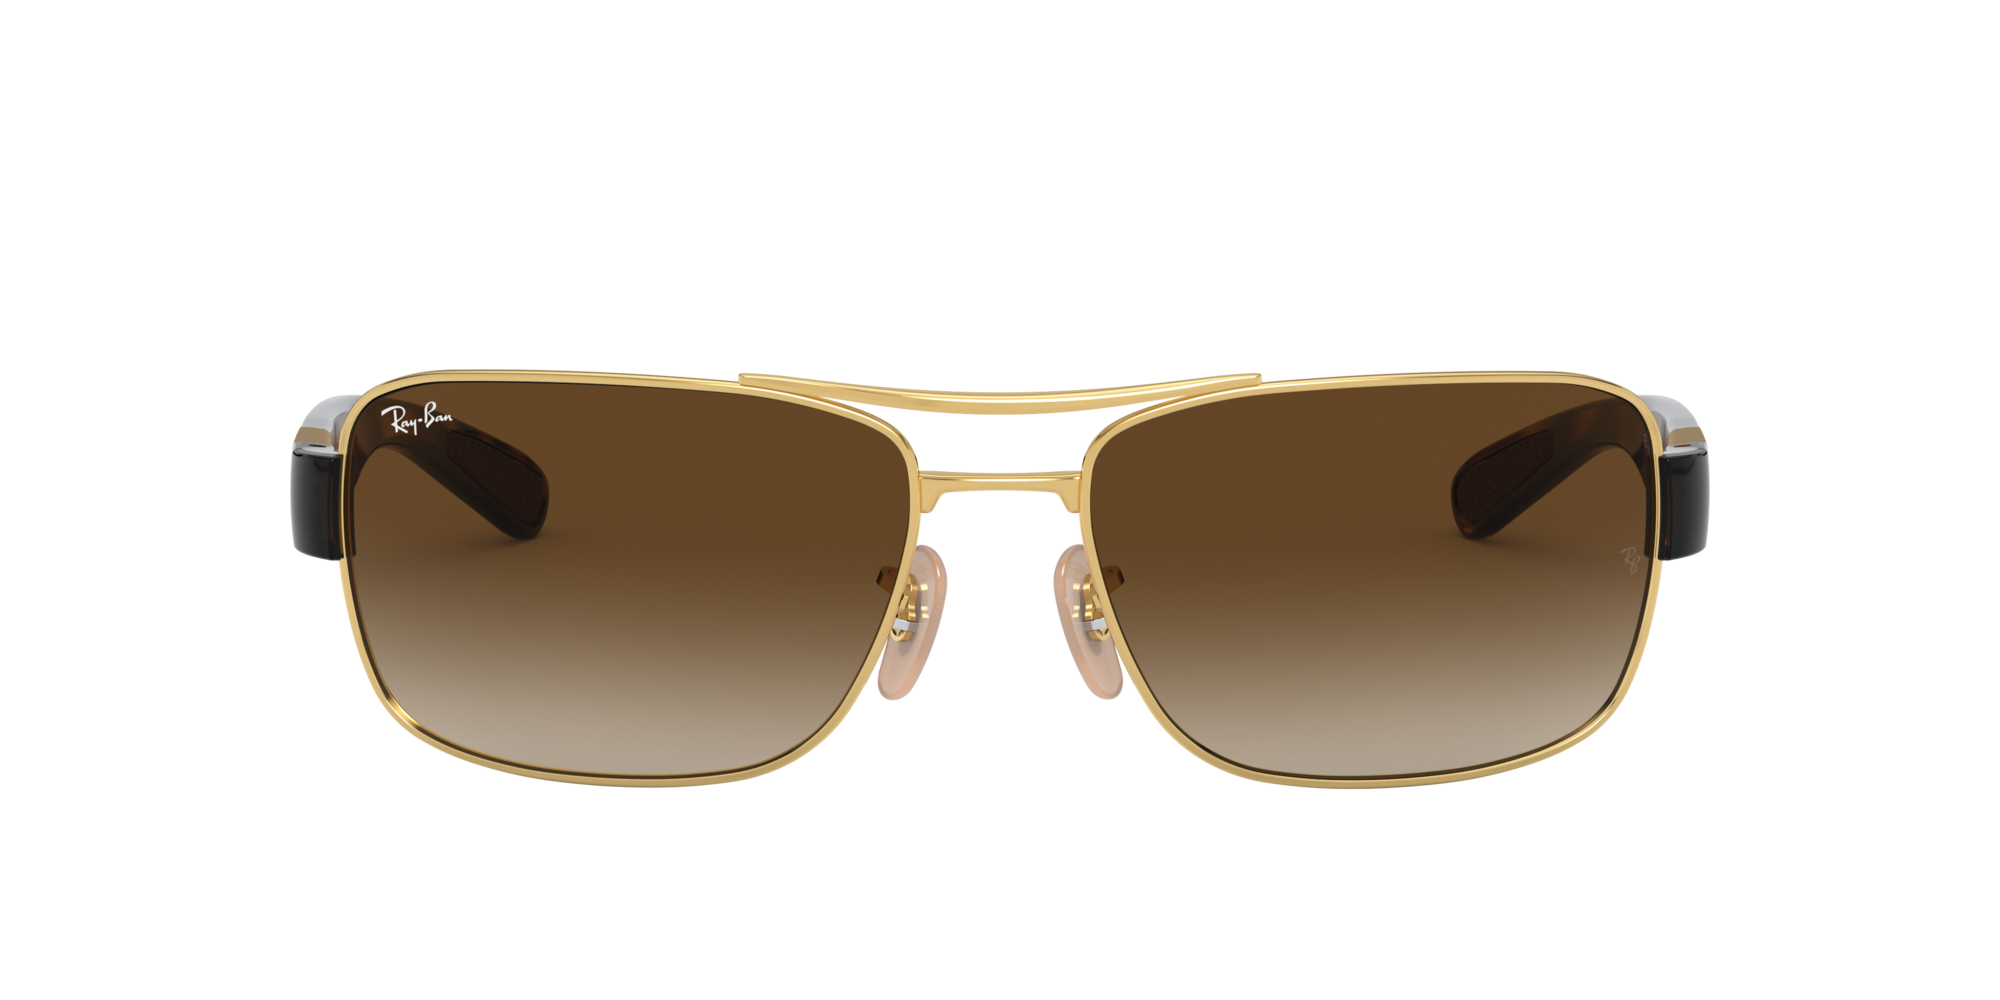 Ray-Ban RB3522 61 Brown Gradient \u0026 Gold 